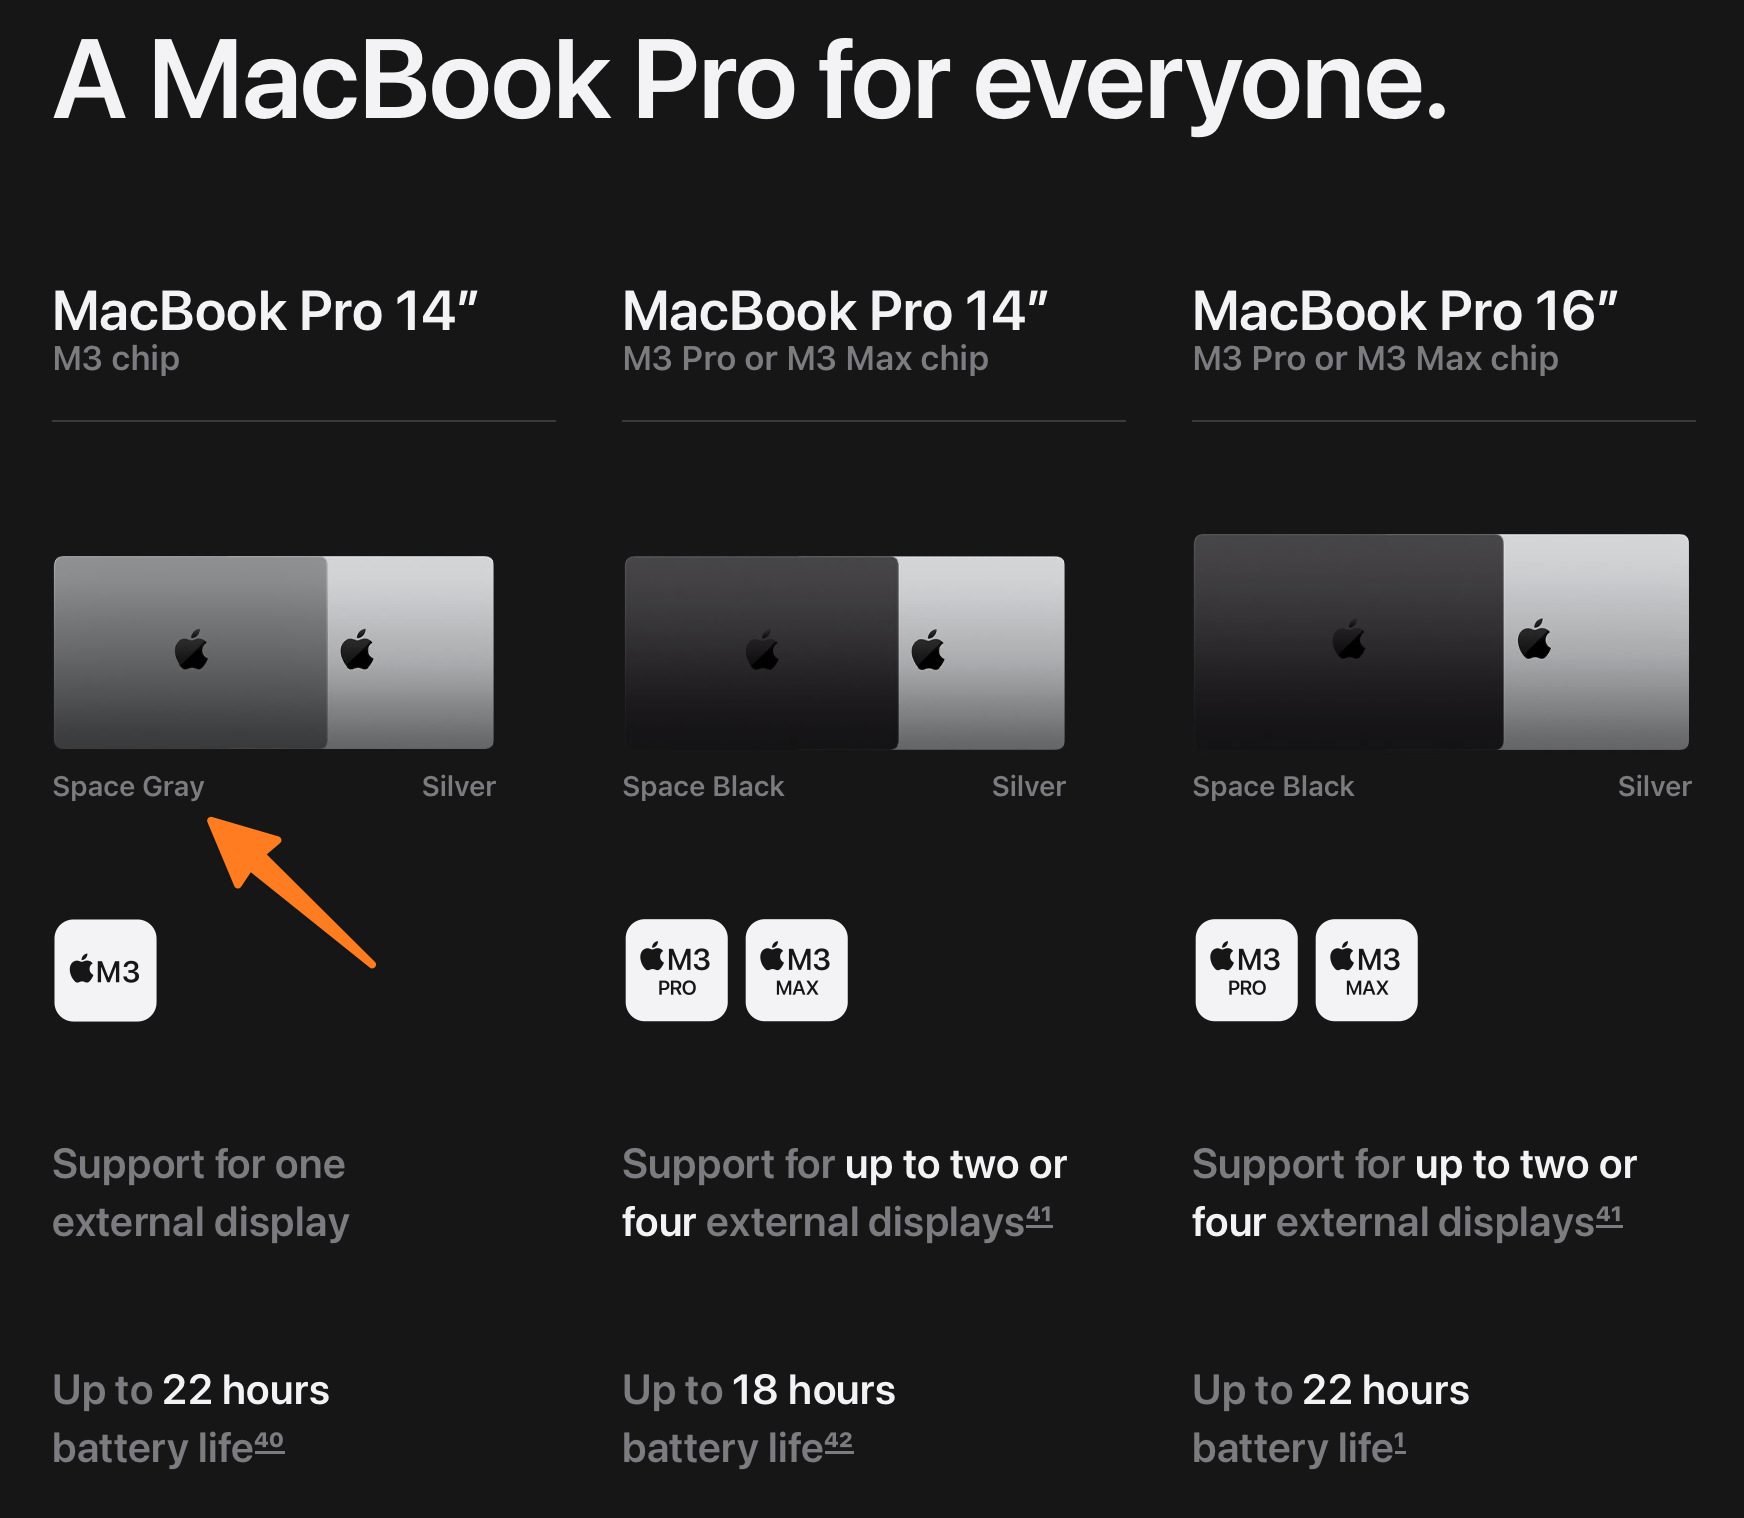 New MacBook Pro lineup with color options.